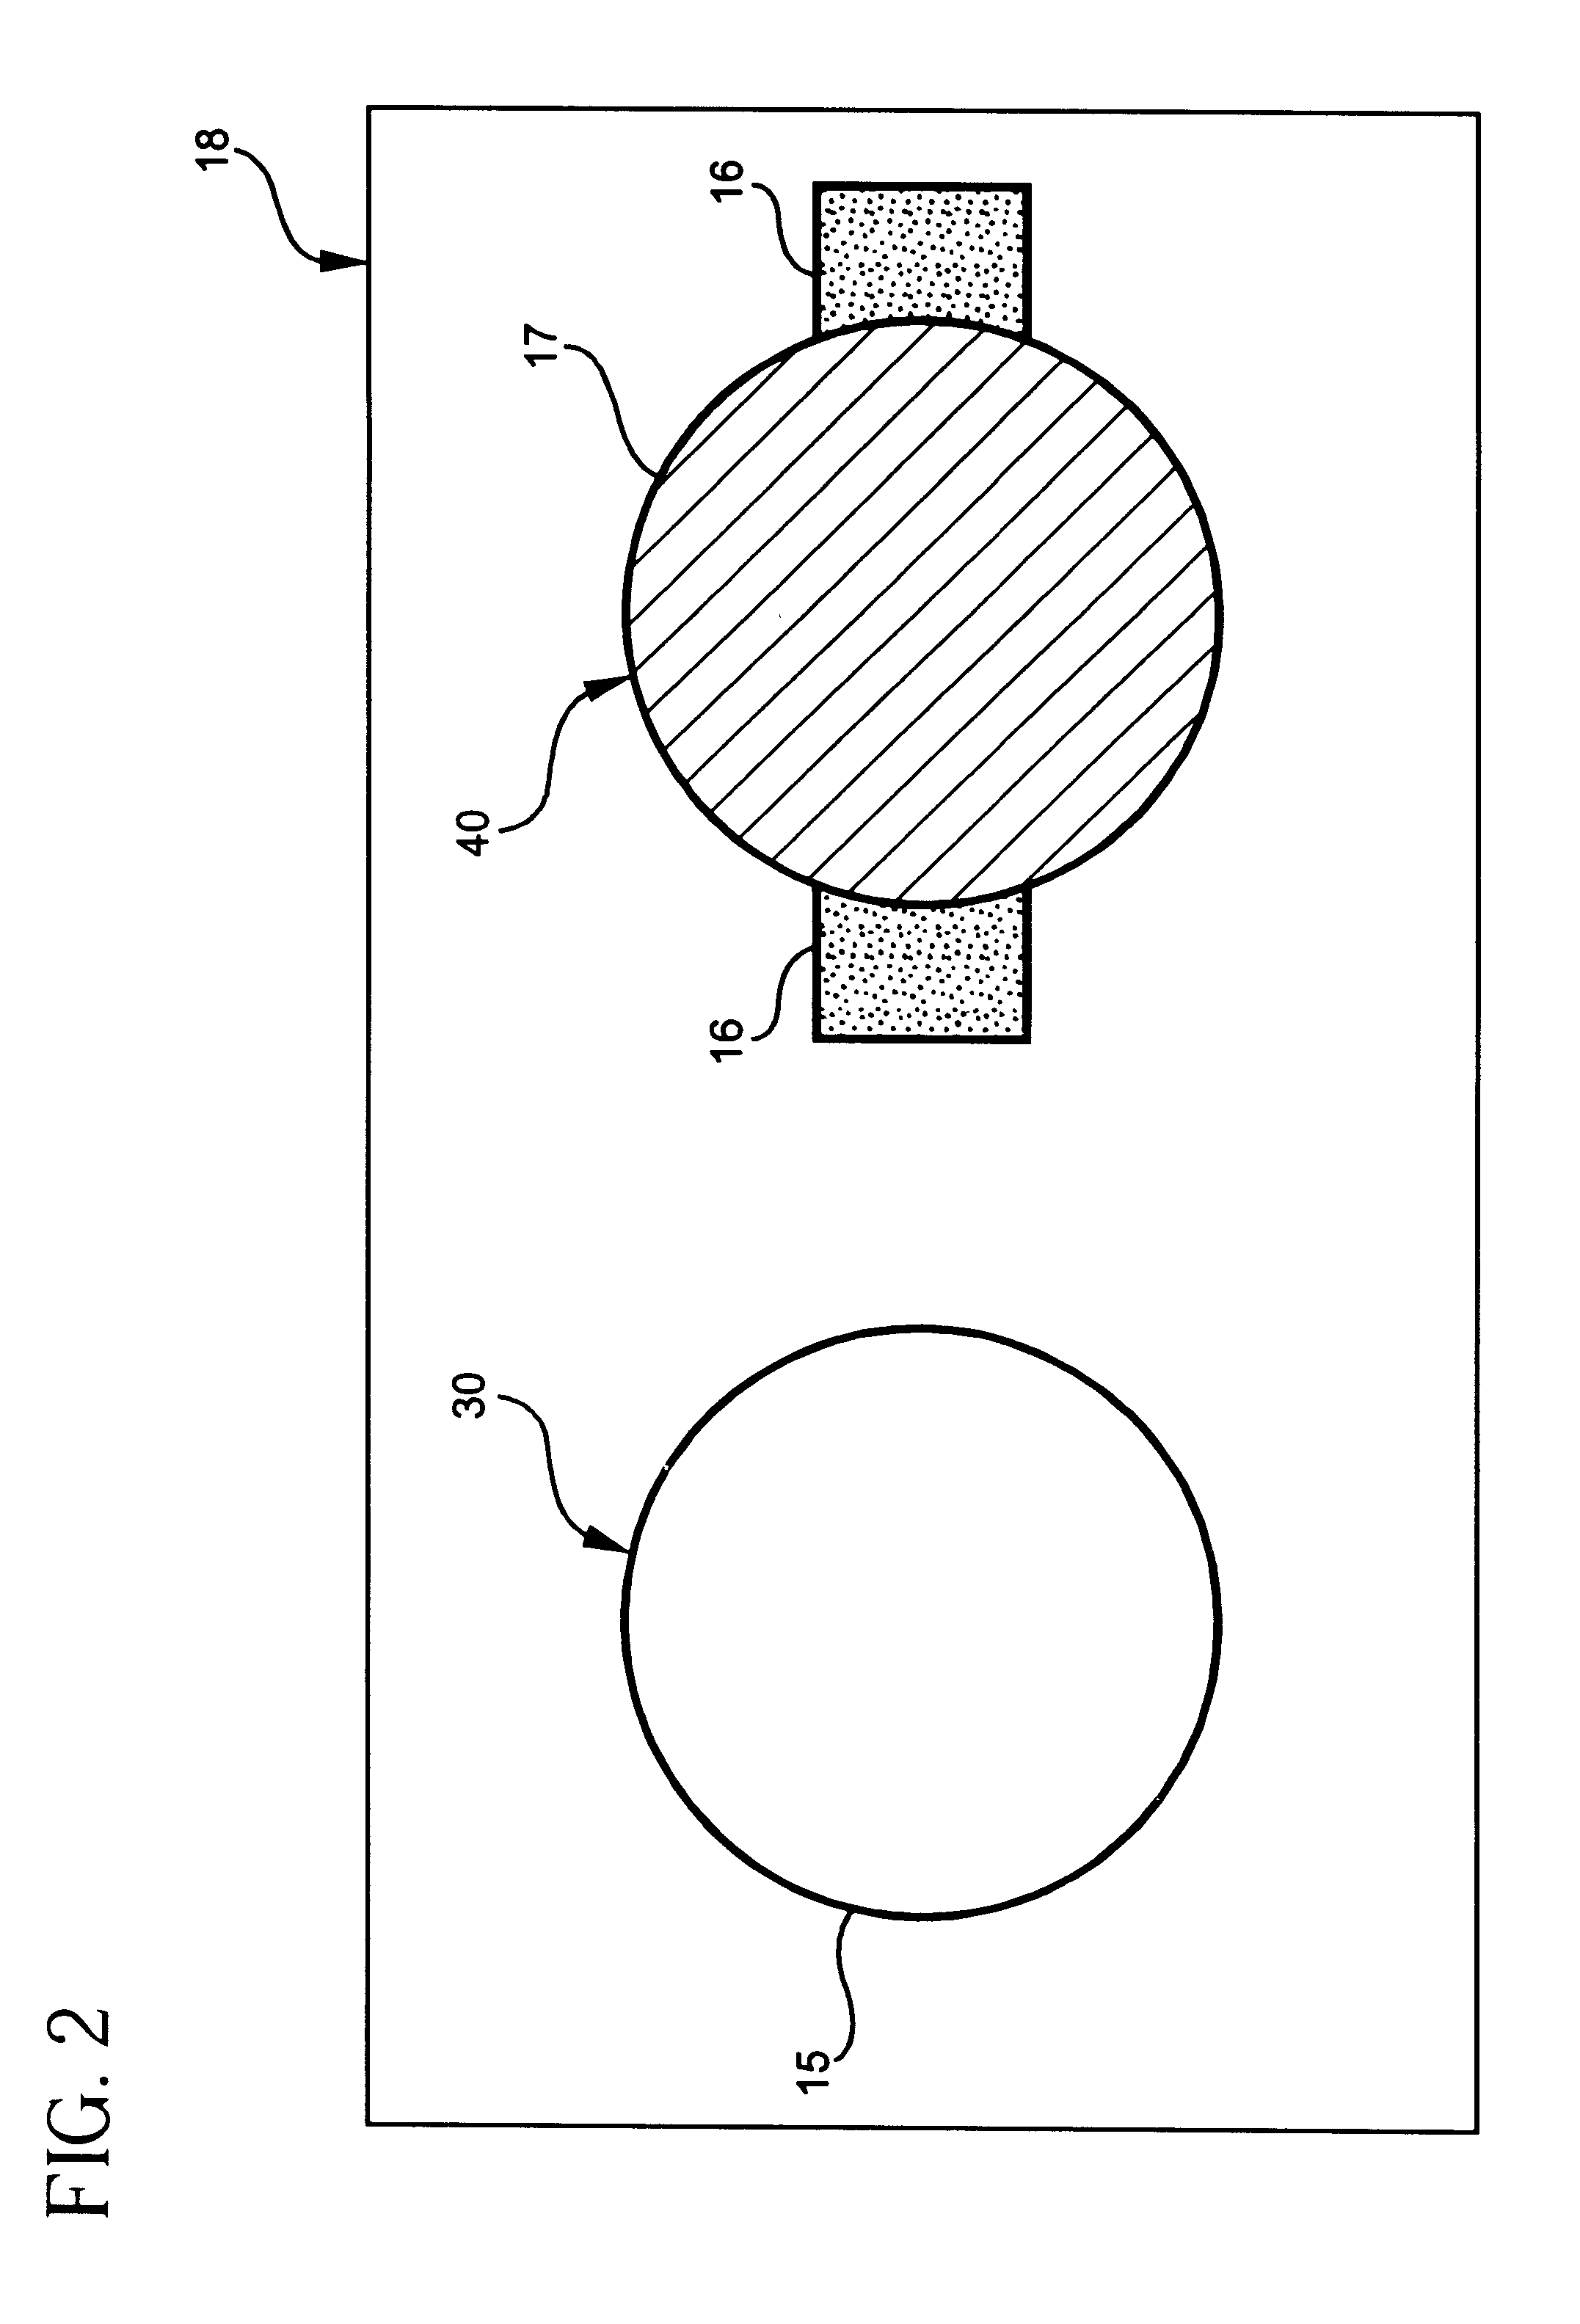 Miniaturized solid-state reference electrode with self-diagnostic function